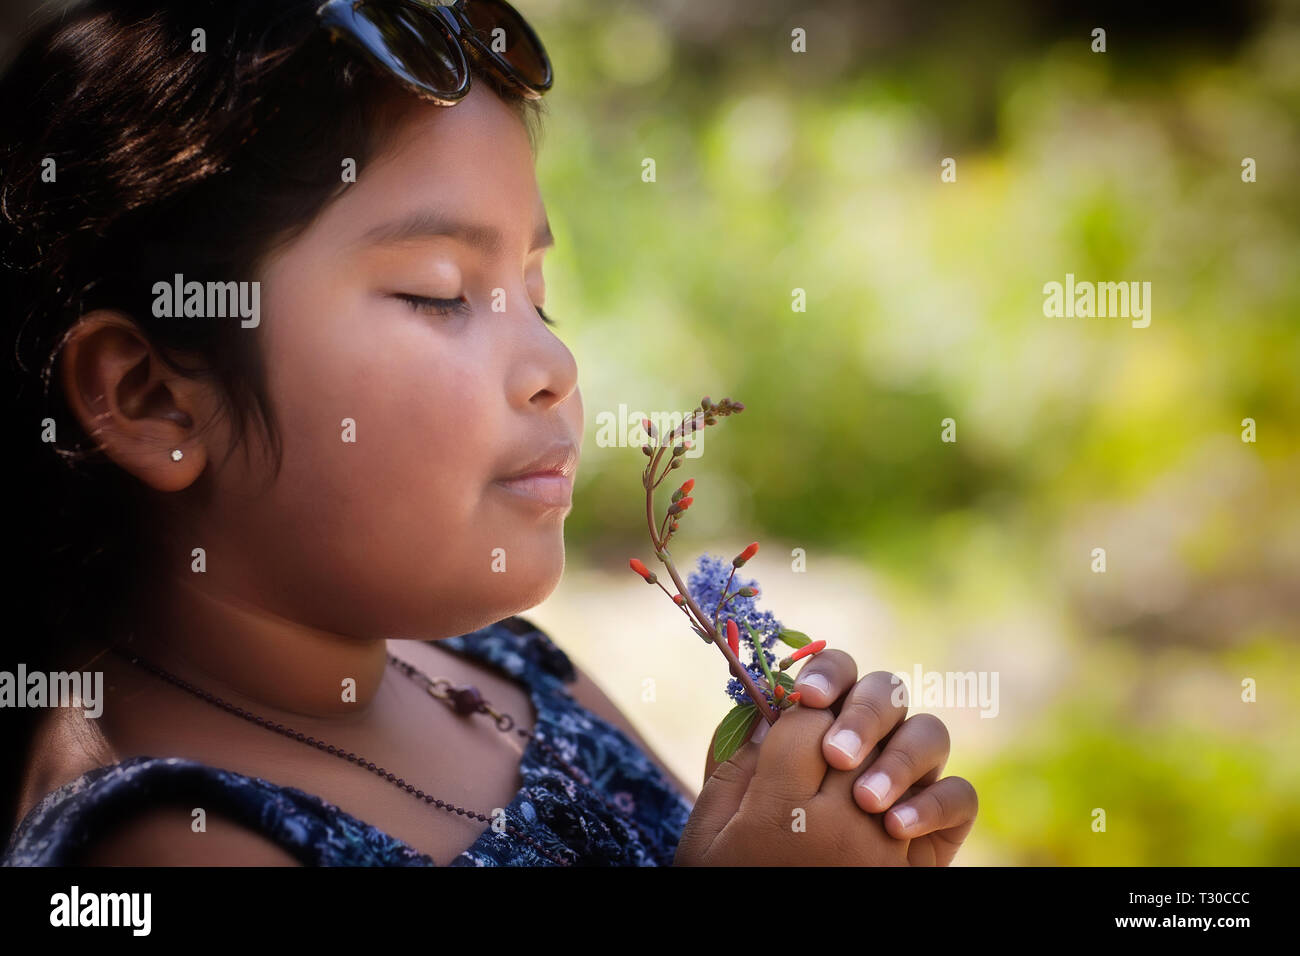 Hispanic little girl with her eyes closed and holding a bouquet of fresh wildflowers to her nose, enjoying the sweet fragrance of the plants. Stock Photo